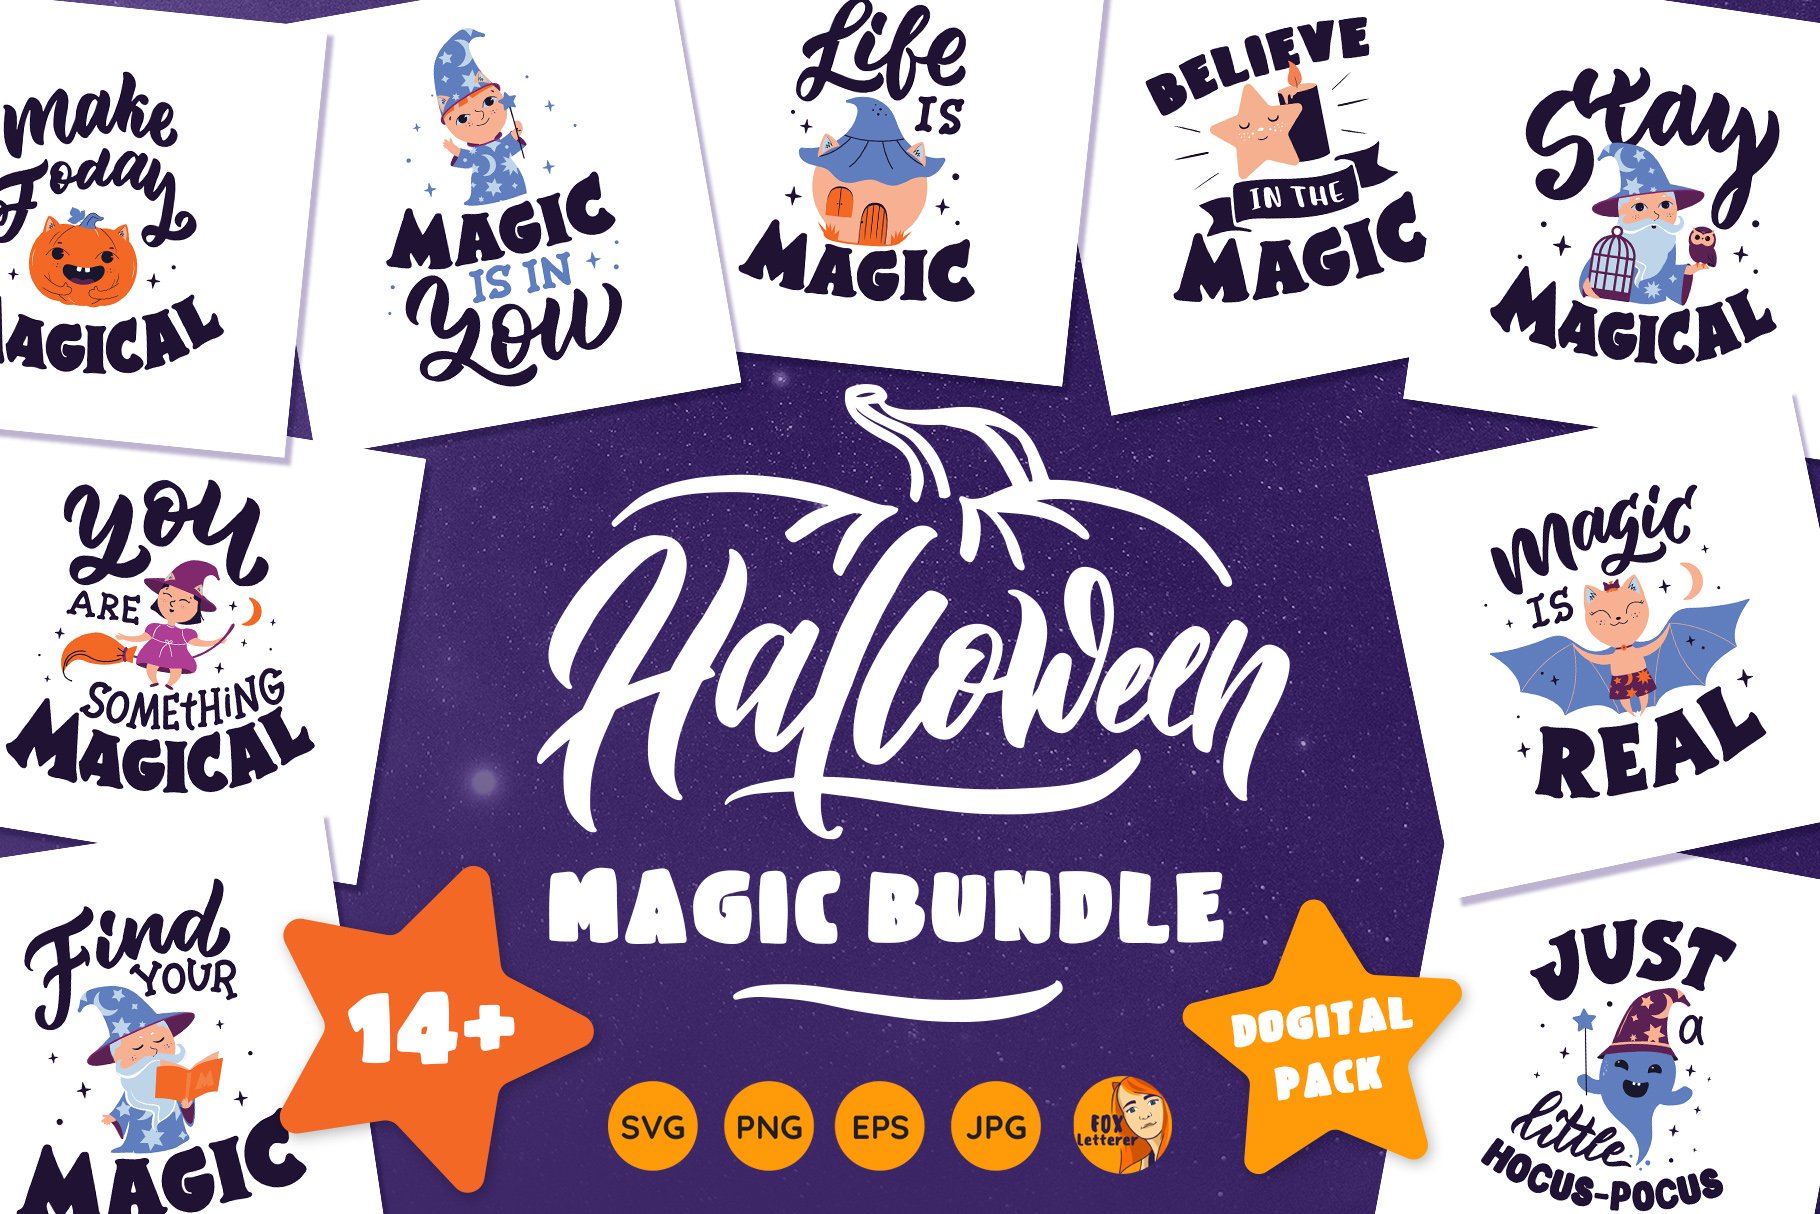 Magical designs for Halloween party cover image.